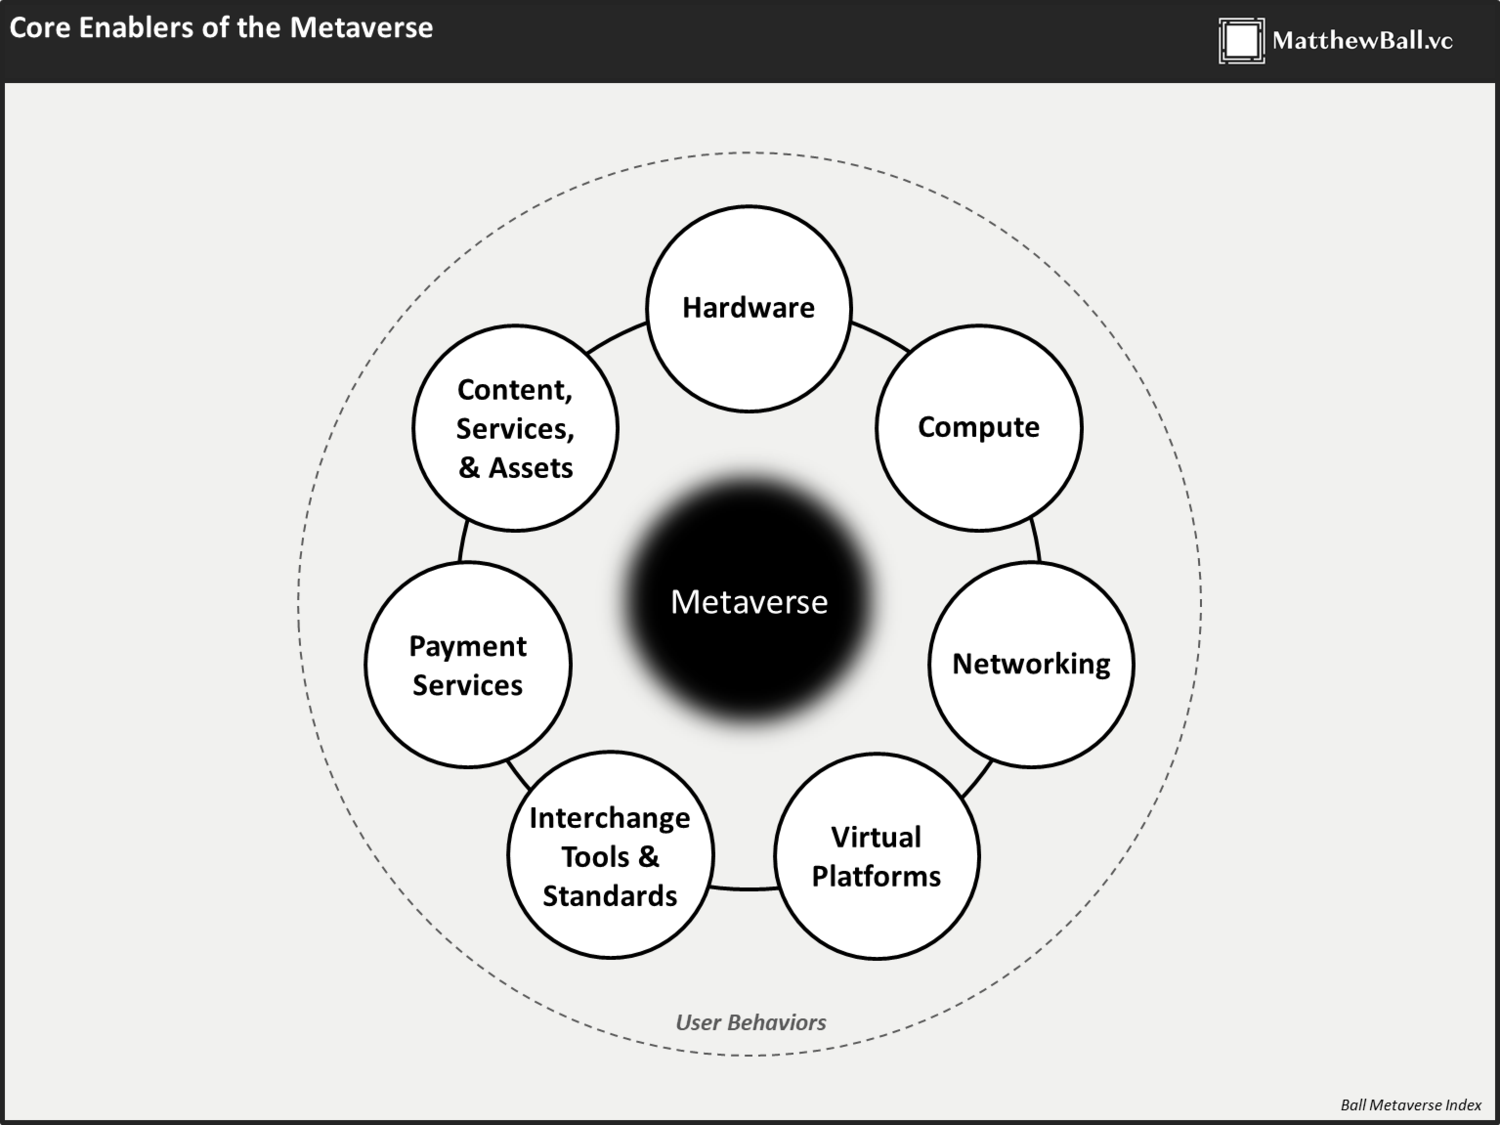 Components of Metaverse